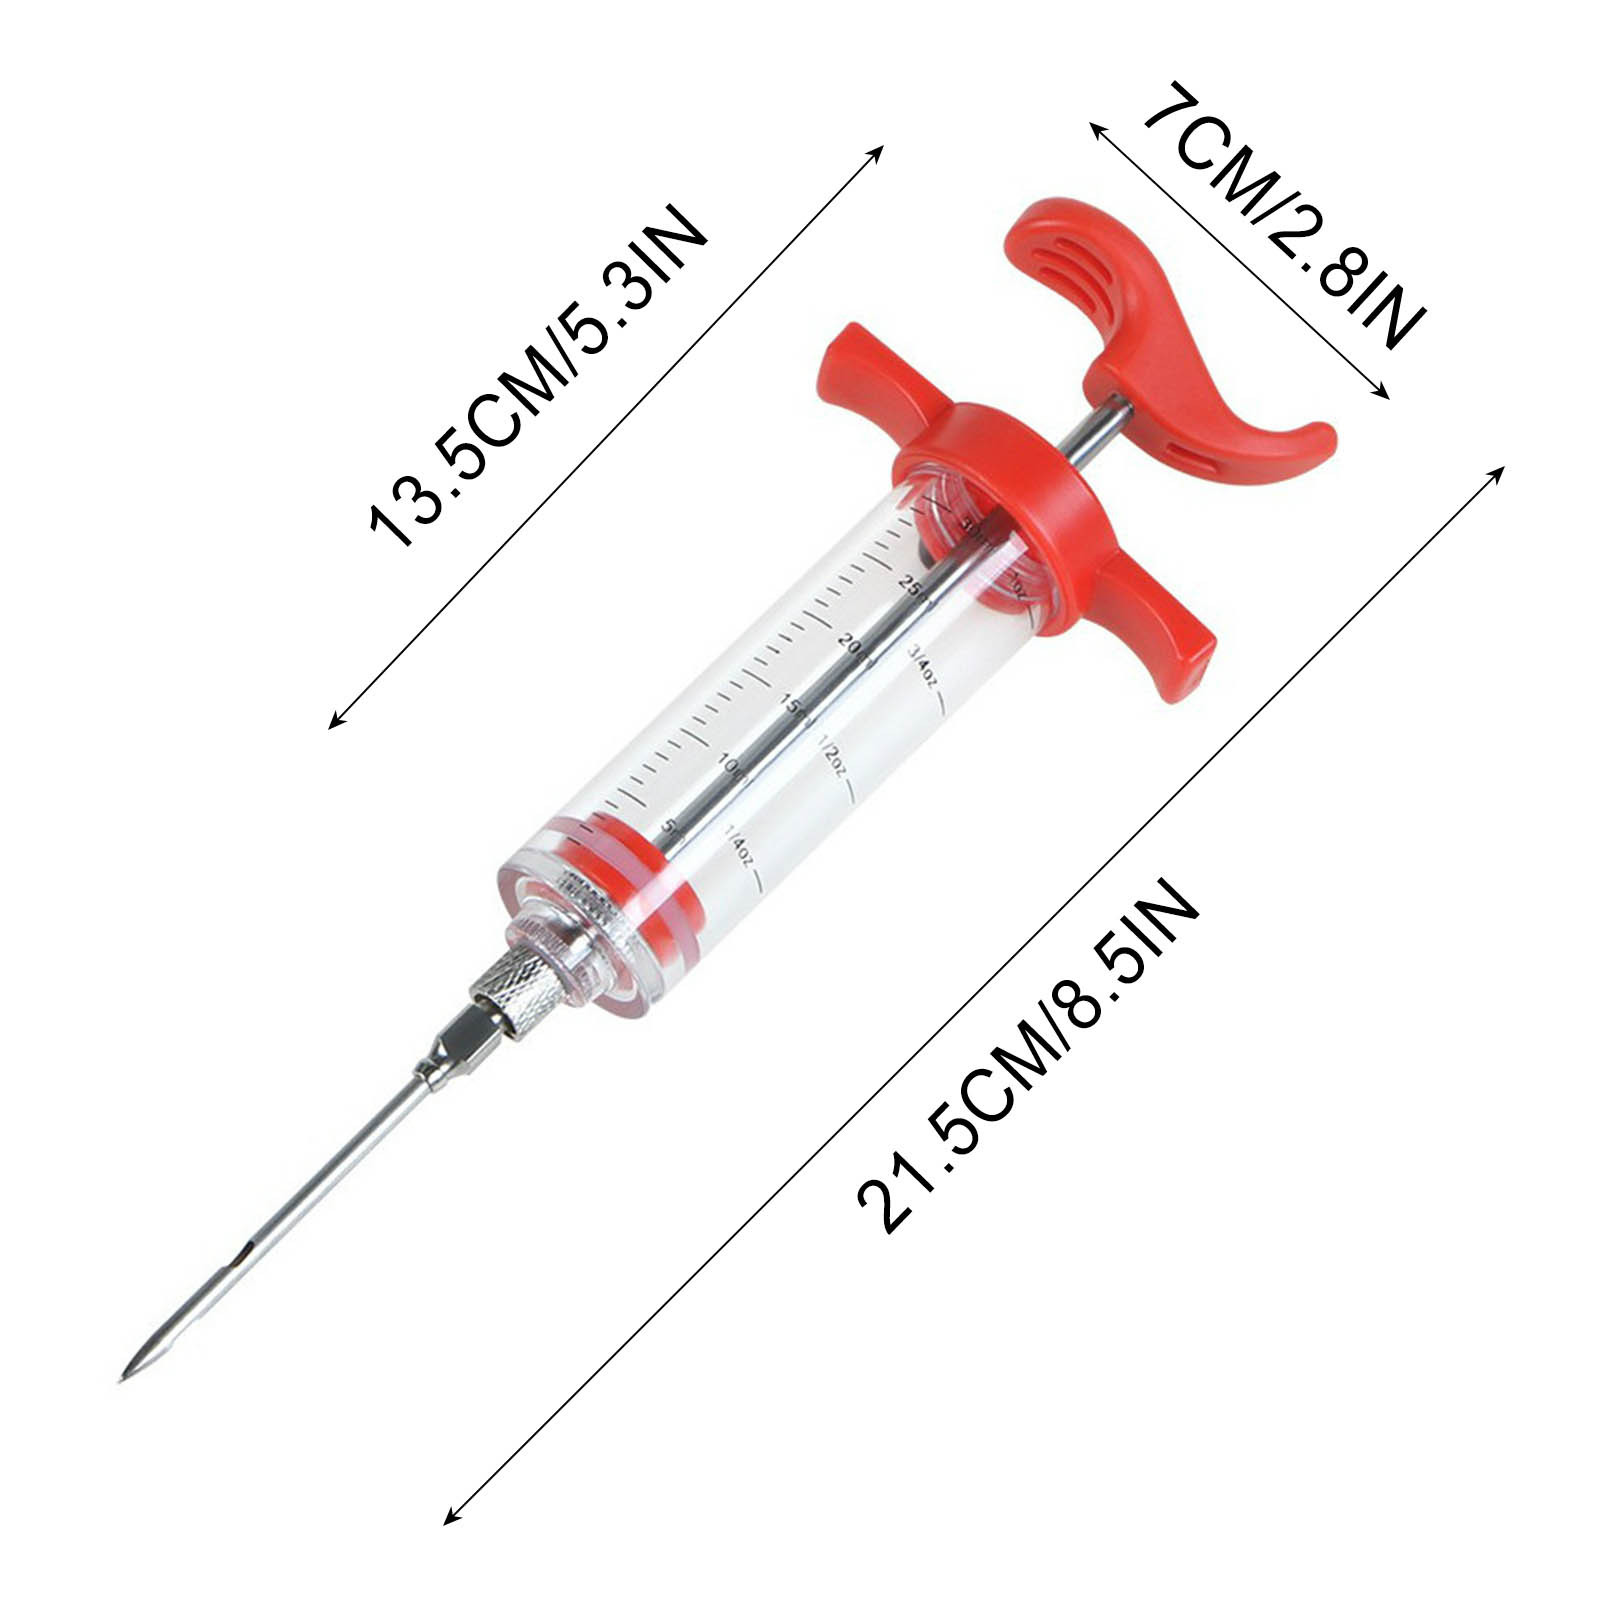 Herrnalise Stainless Steel Meat Injector Syringe For BBQ Grill Professional-Smoker Seasoning Culinary Barbecue Syringe Barbecue Tool Kitchen Essentials on Sale - image 3 of 9